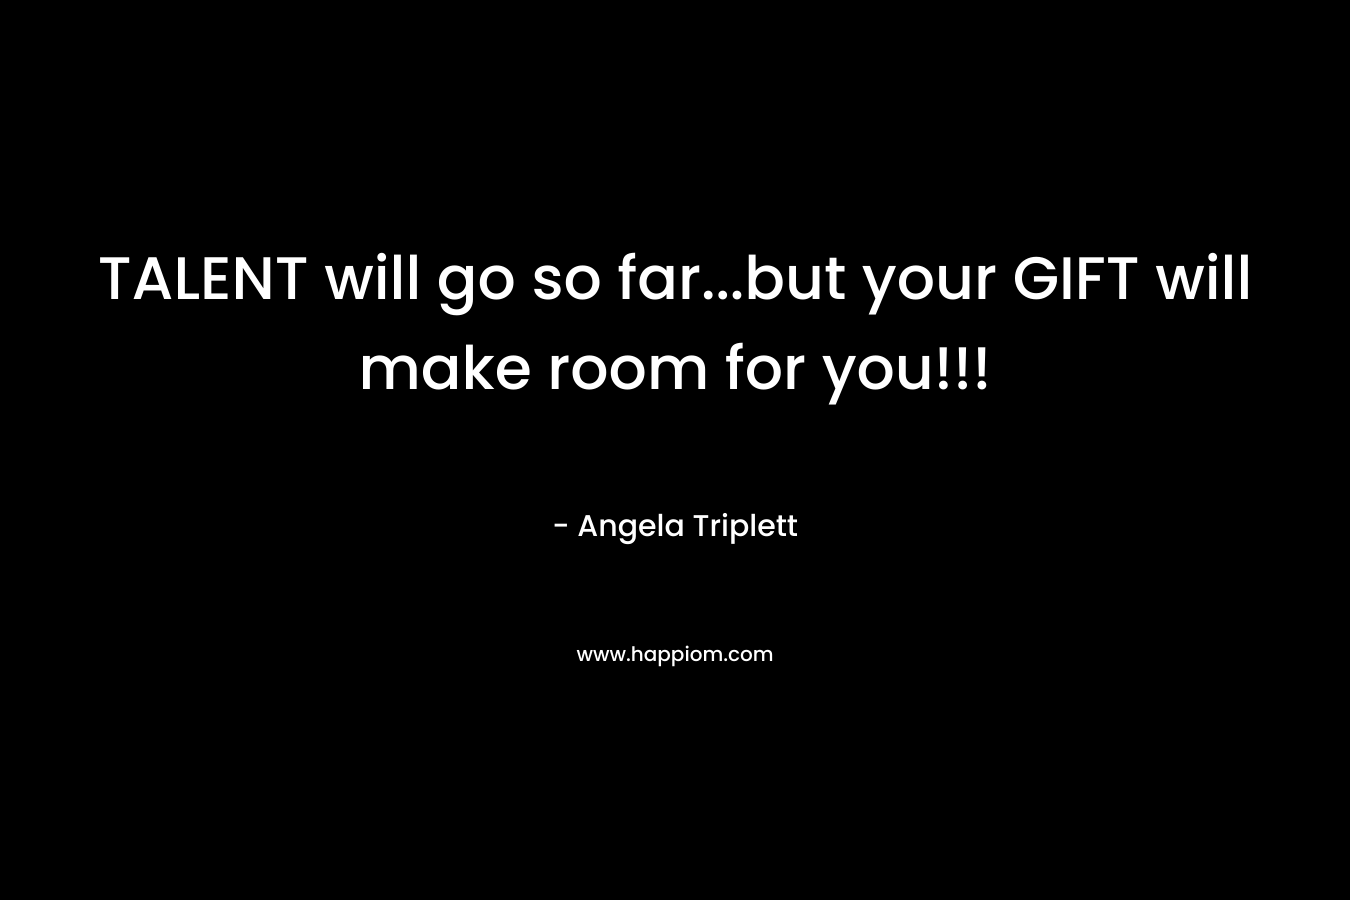 TALENT will go so far…but your GIFT will make room for you!!! – Angela Triplett